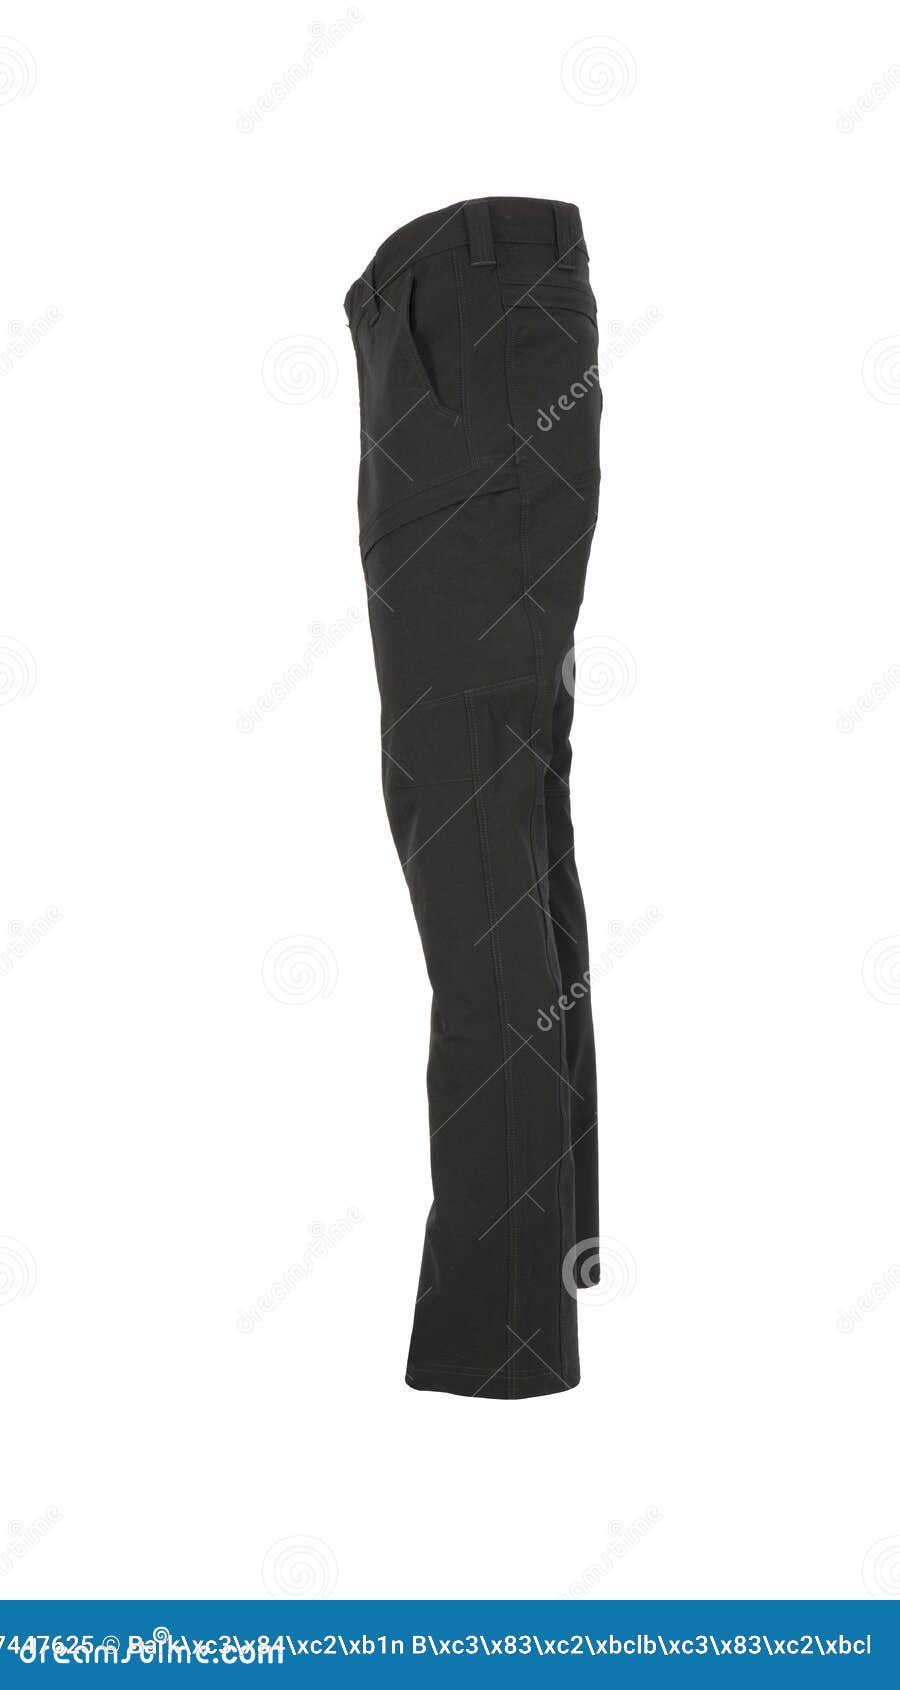 Tactical Black Pants in Front of White Background Stock Image - Image ...